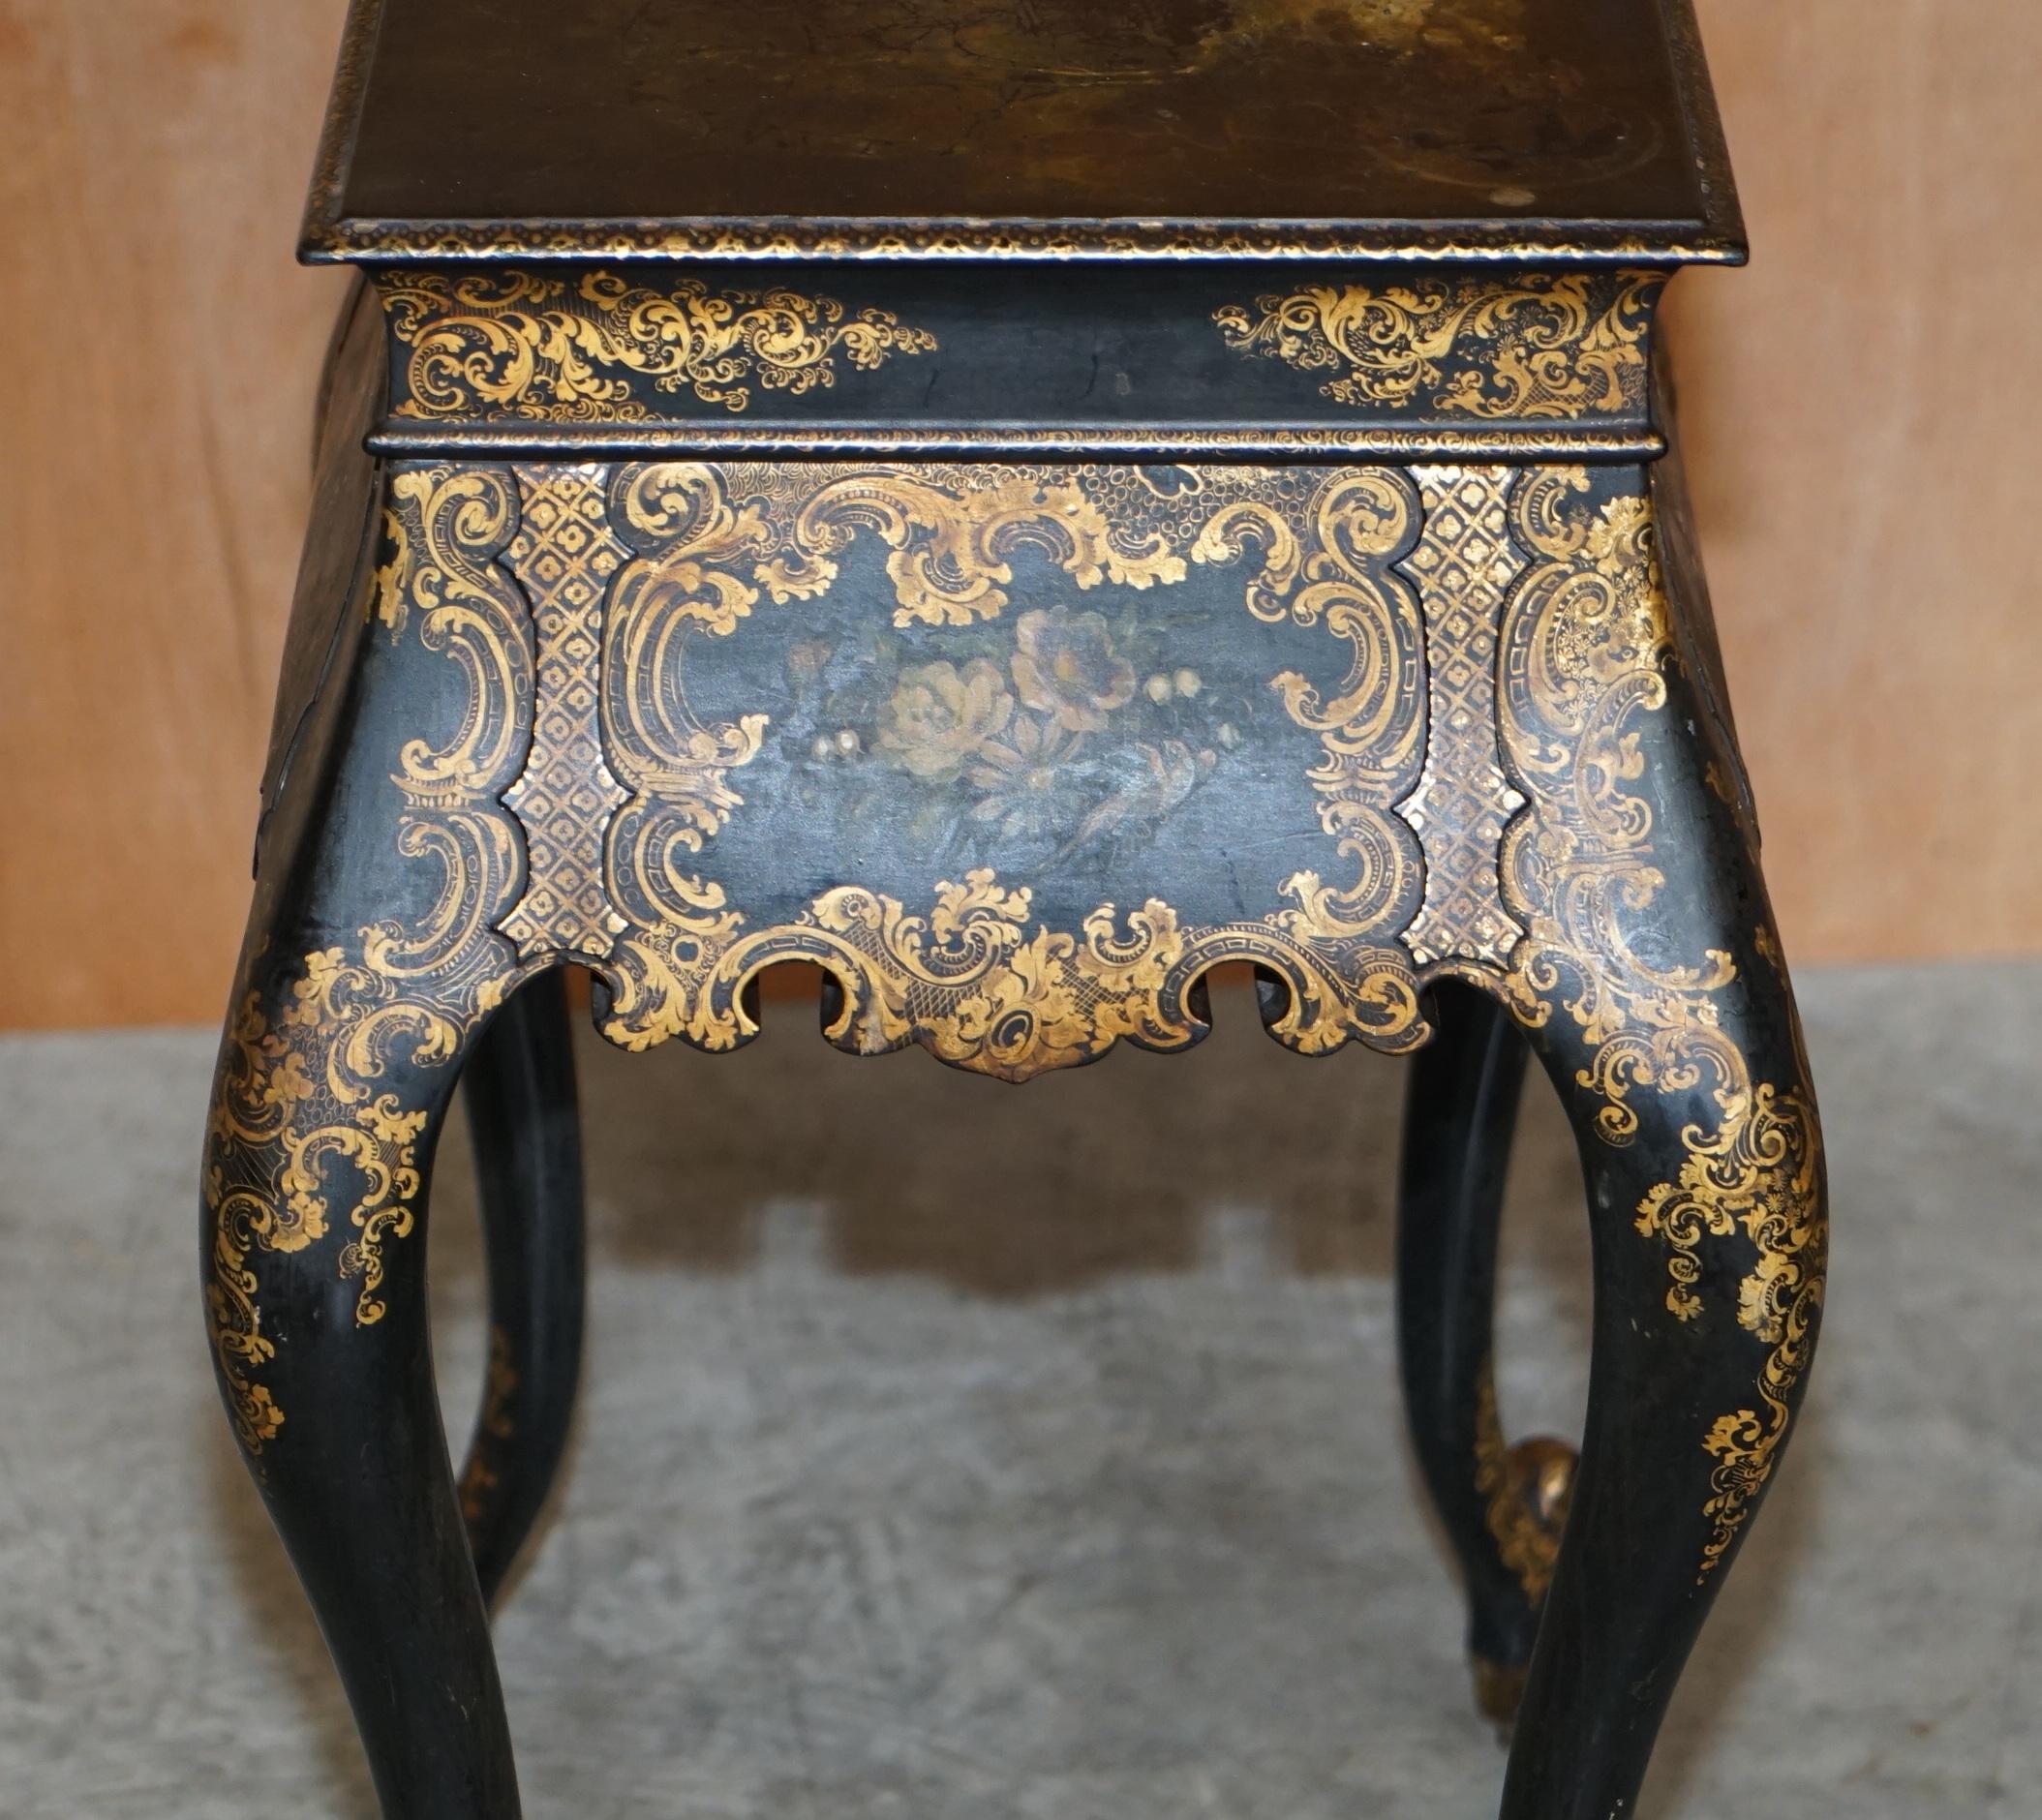 Georgian Antique circa 1800 George III Chinese Lacquer & Gold Gilt Work Table For Sale 6